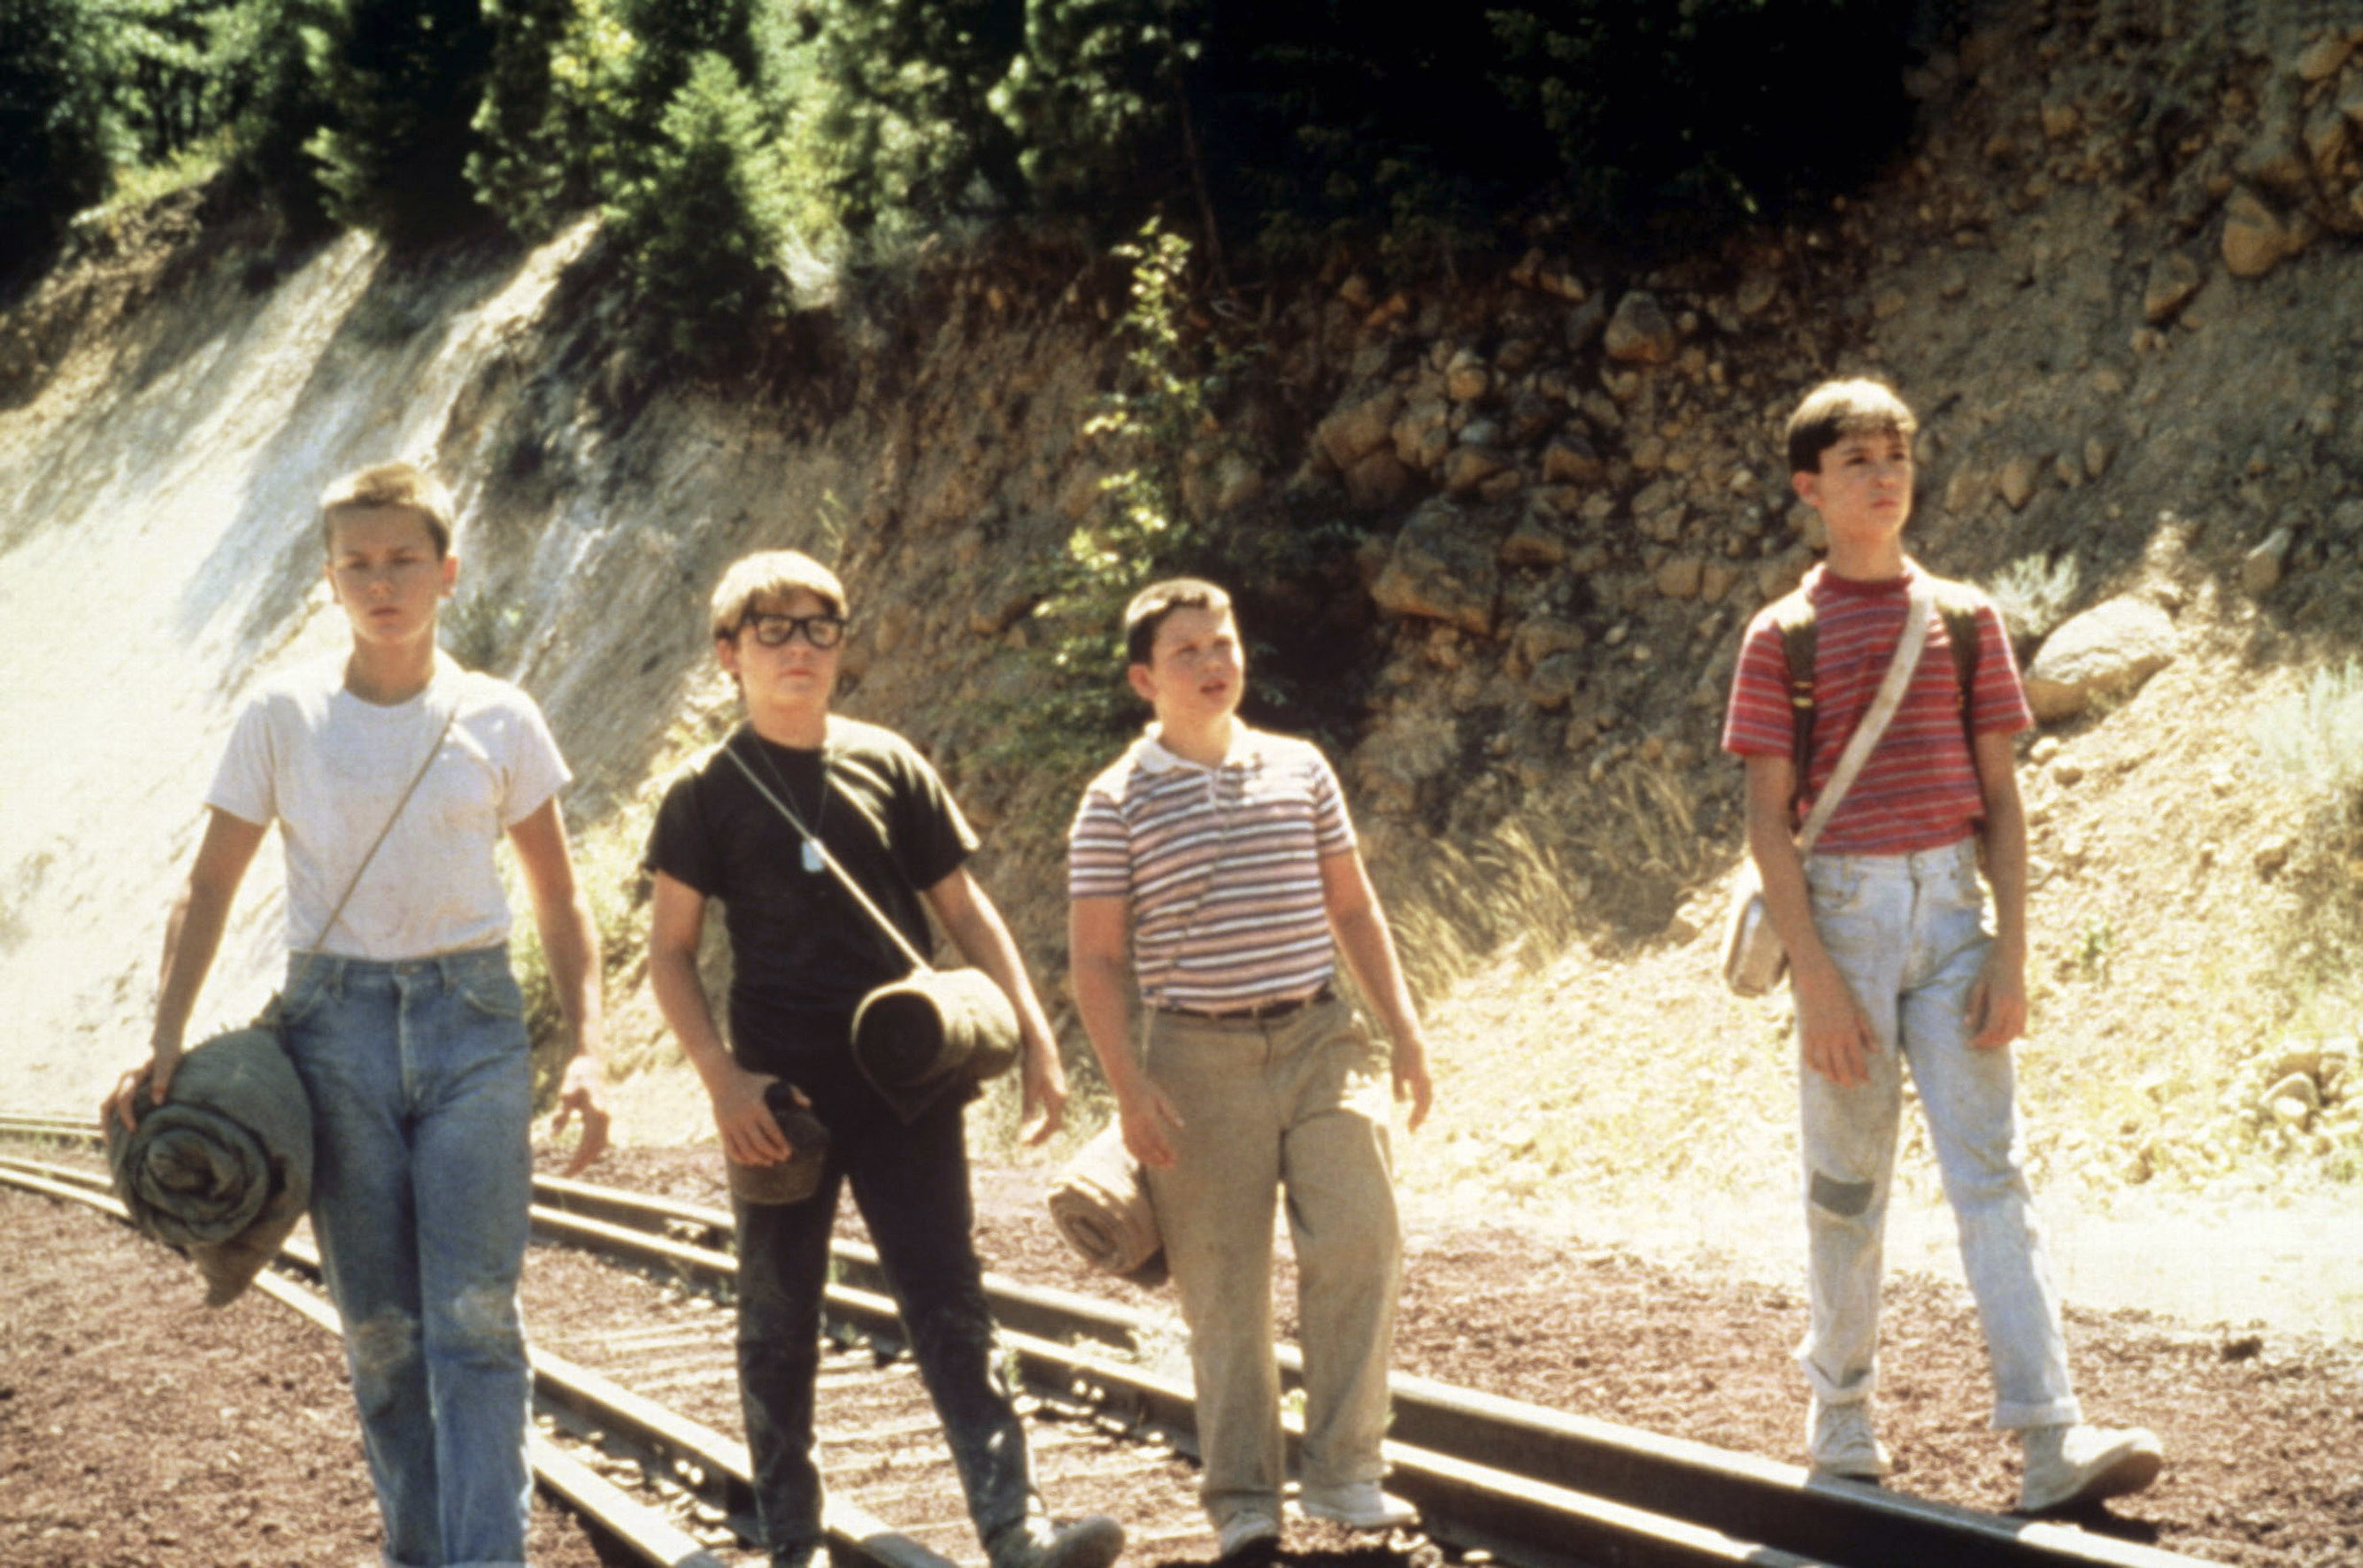 Four boys from the film &quot;Stand by Me&quot; walking on railroad tracks in casual attire